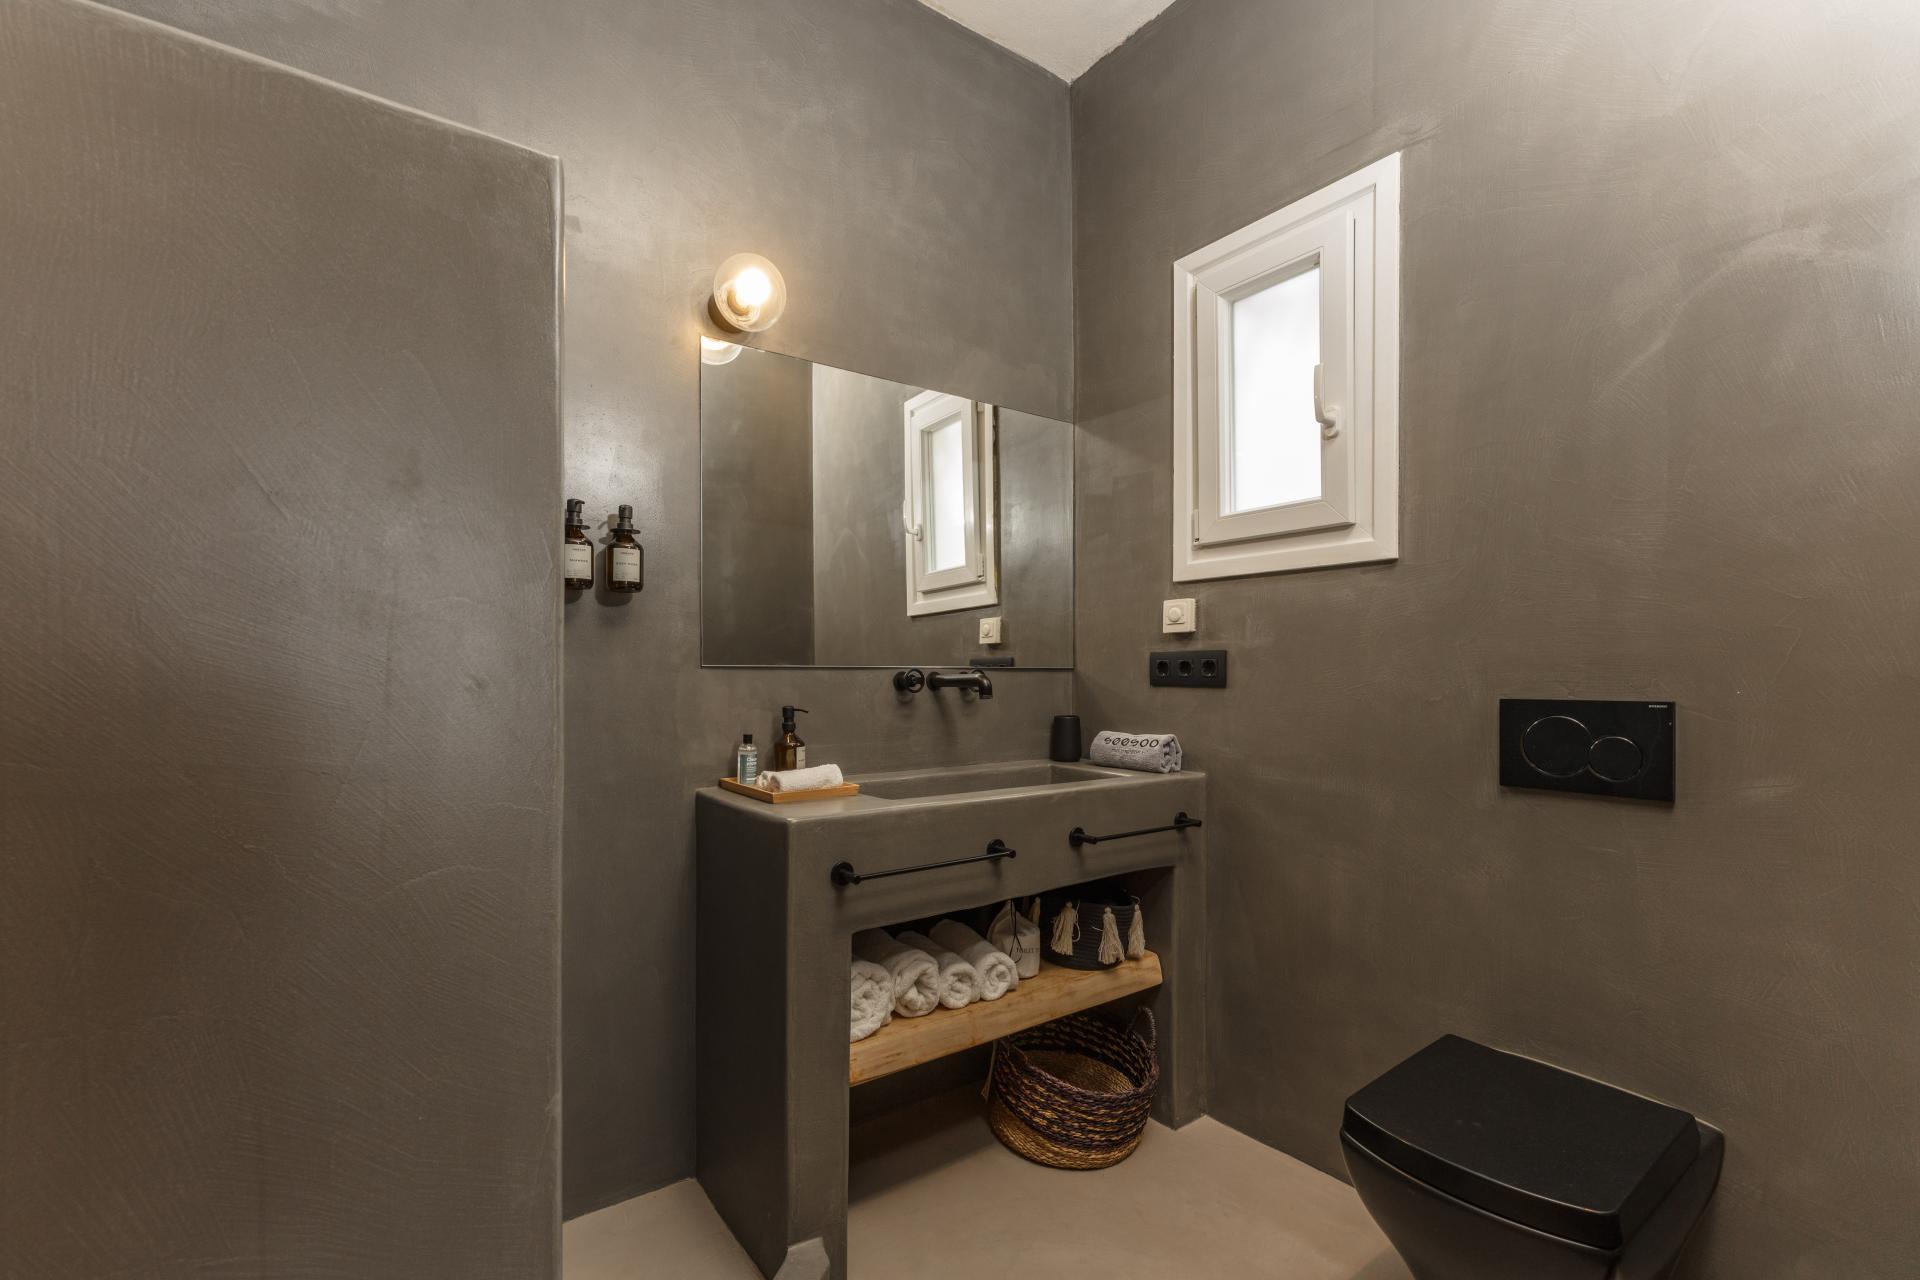 Bathroom with grey walls and white towels under the sink